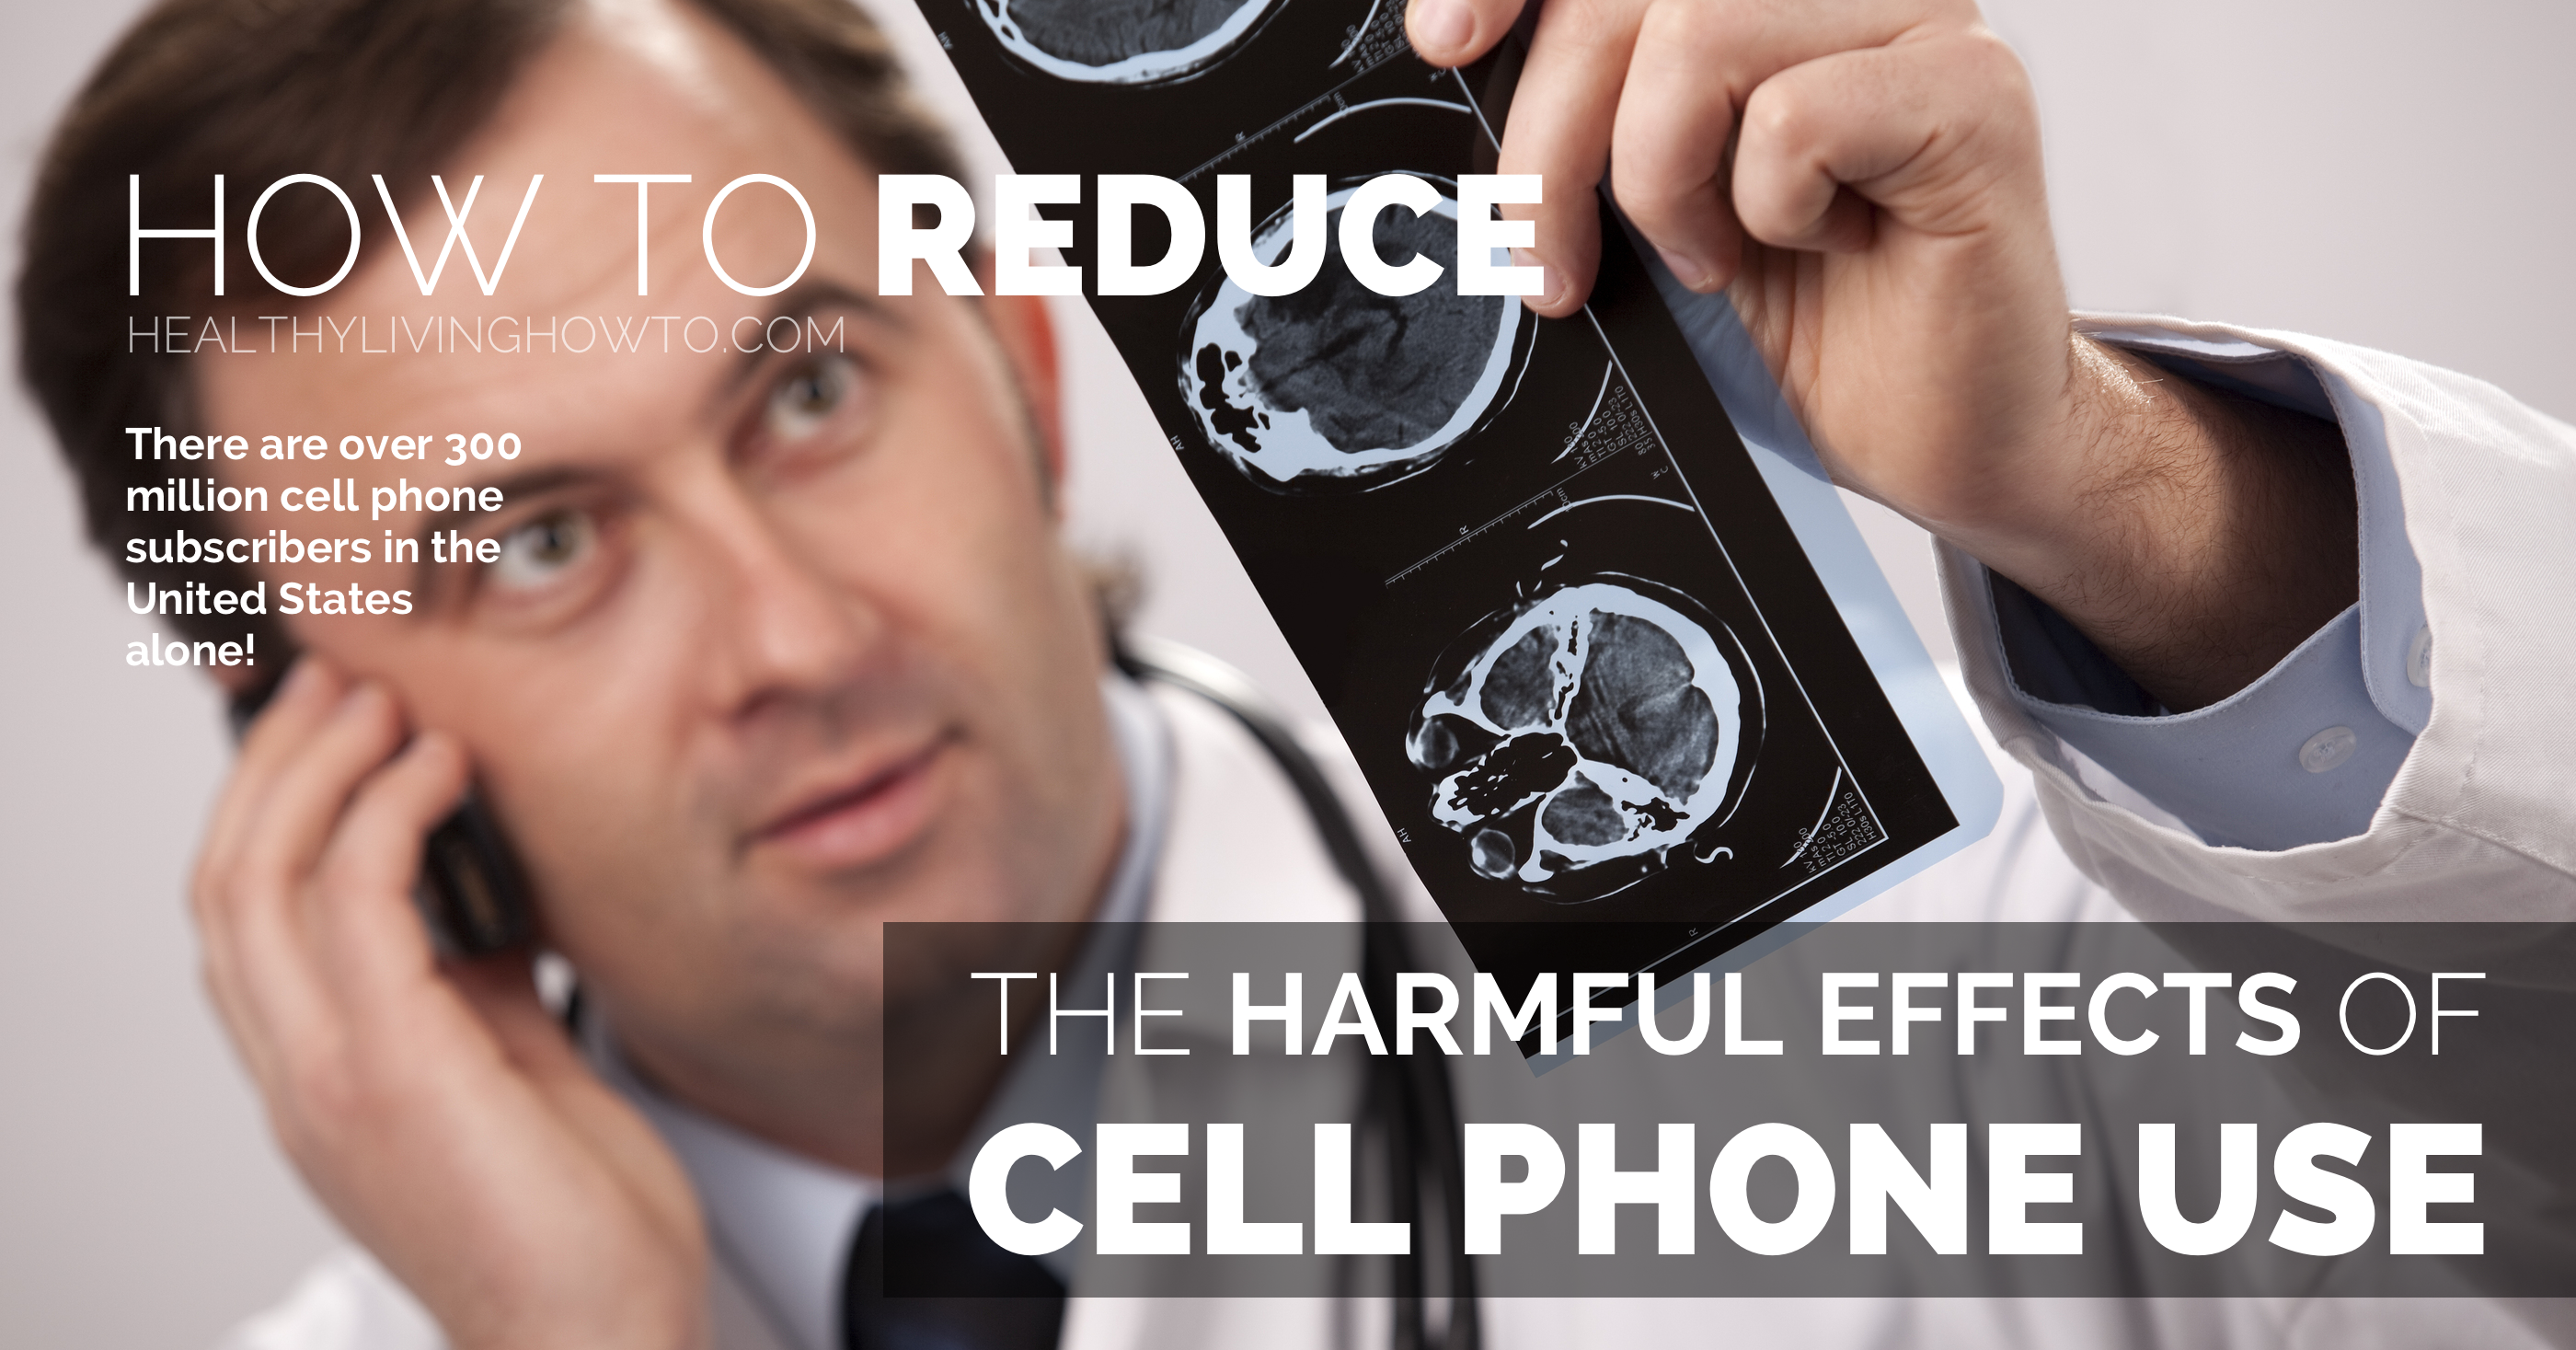 How To Reduce the Harmful Effects of Cell Phone Use | healthylivinghowto.com